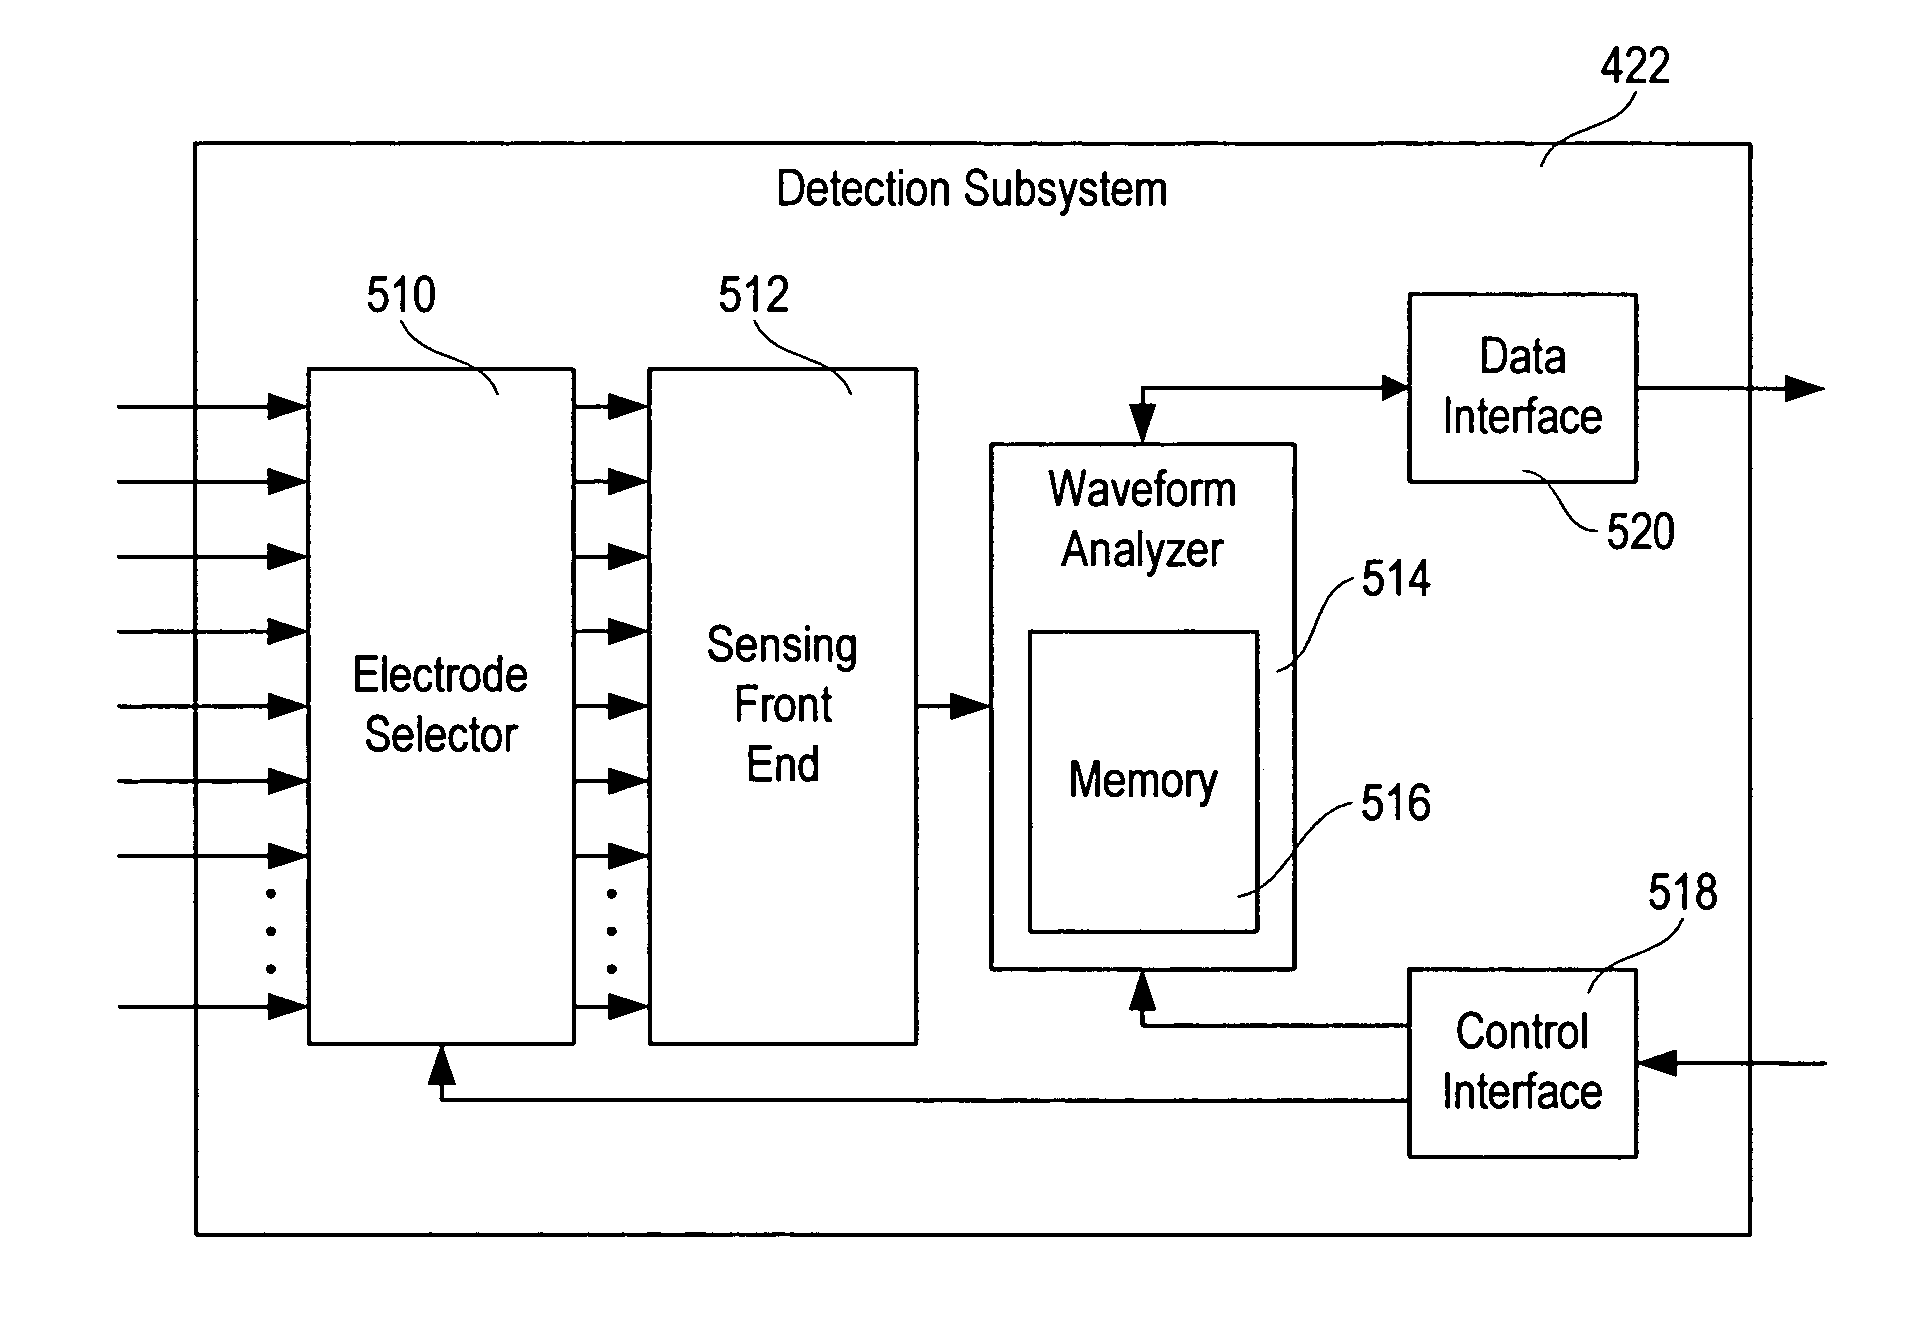 Seizure sensing and detection using an implantable device